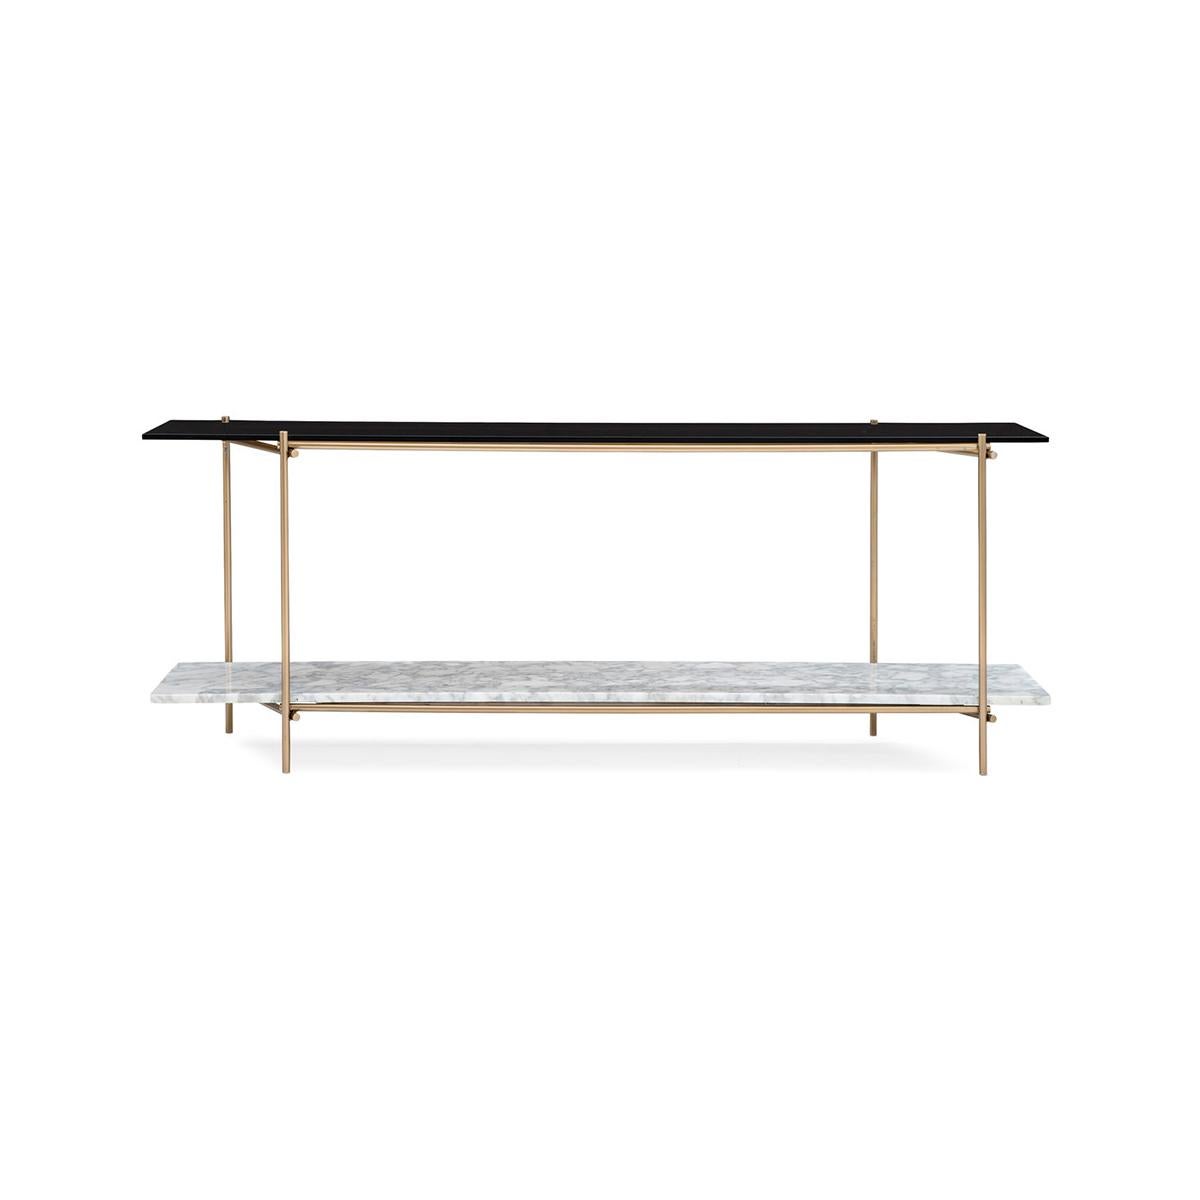 Glass, metal, and stone meet and meld in this exceptionally beautiful console table. Its modern silhouette is open and airy yet offers substantial presence. At the top you’ll find an elegant plane of glass tinted in a warm brown that lets you look